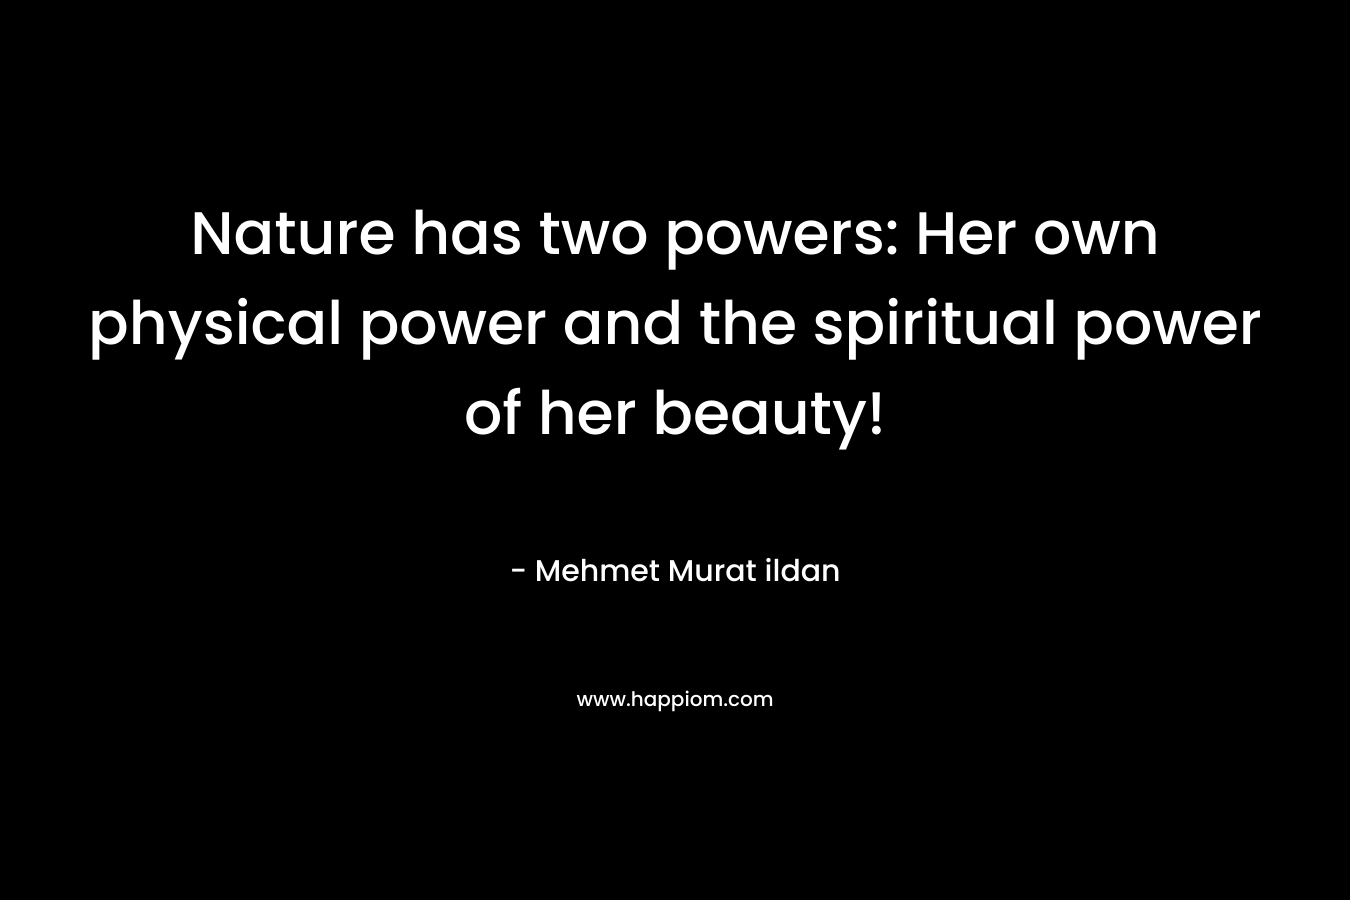 Nature has two powers: Her own physical power and the spiritual power of her beauty!